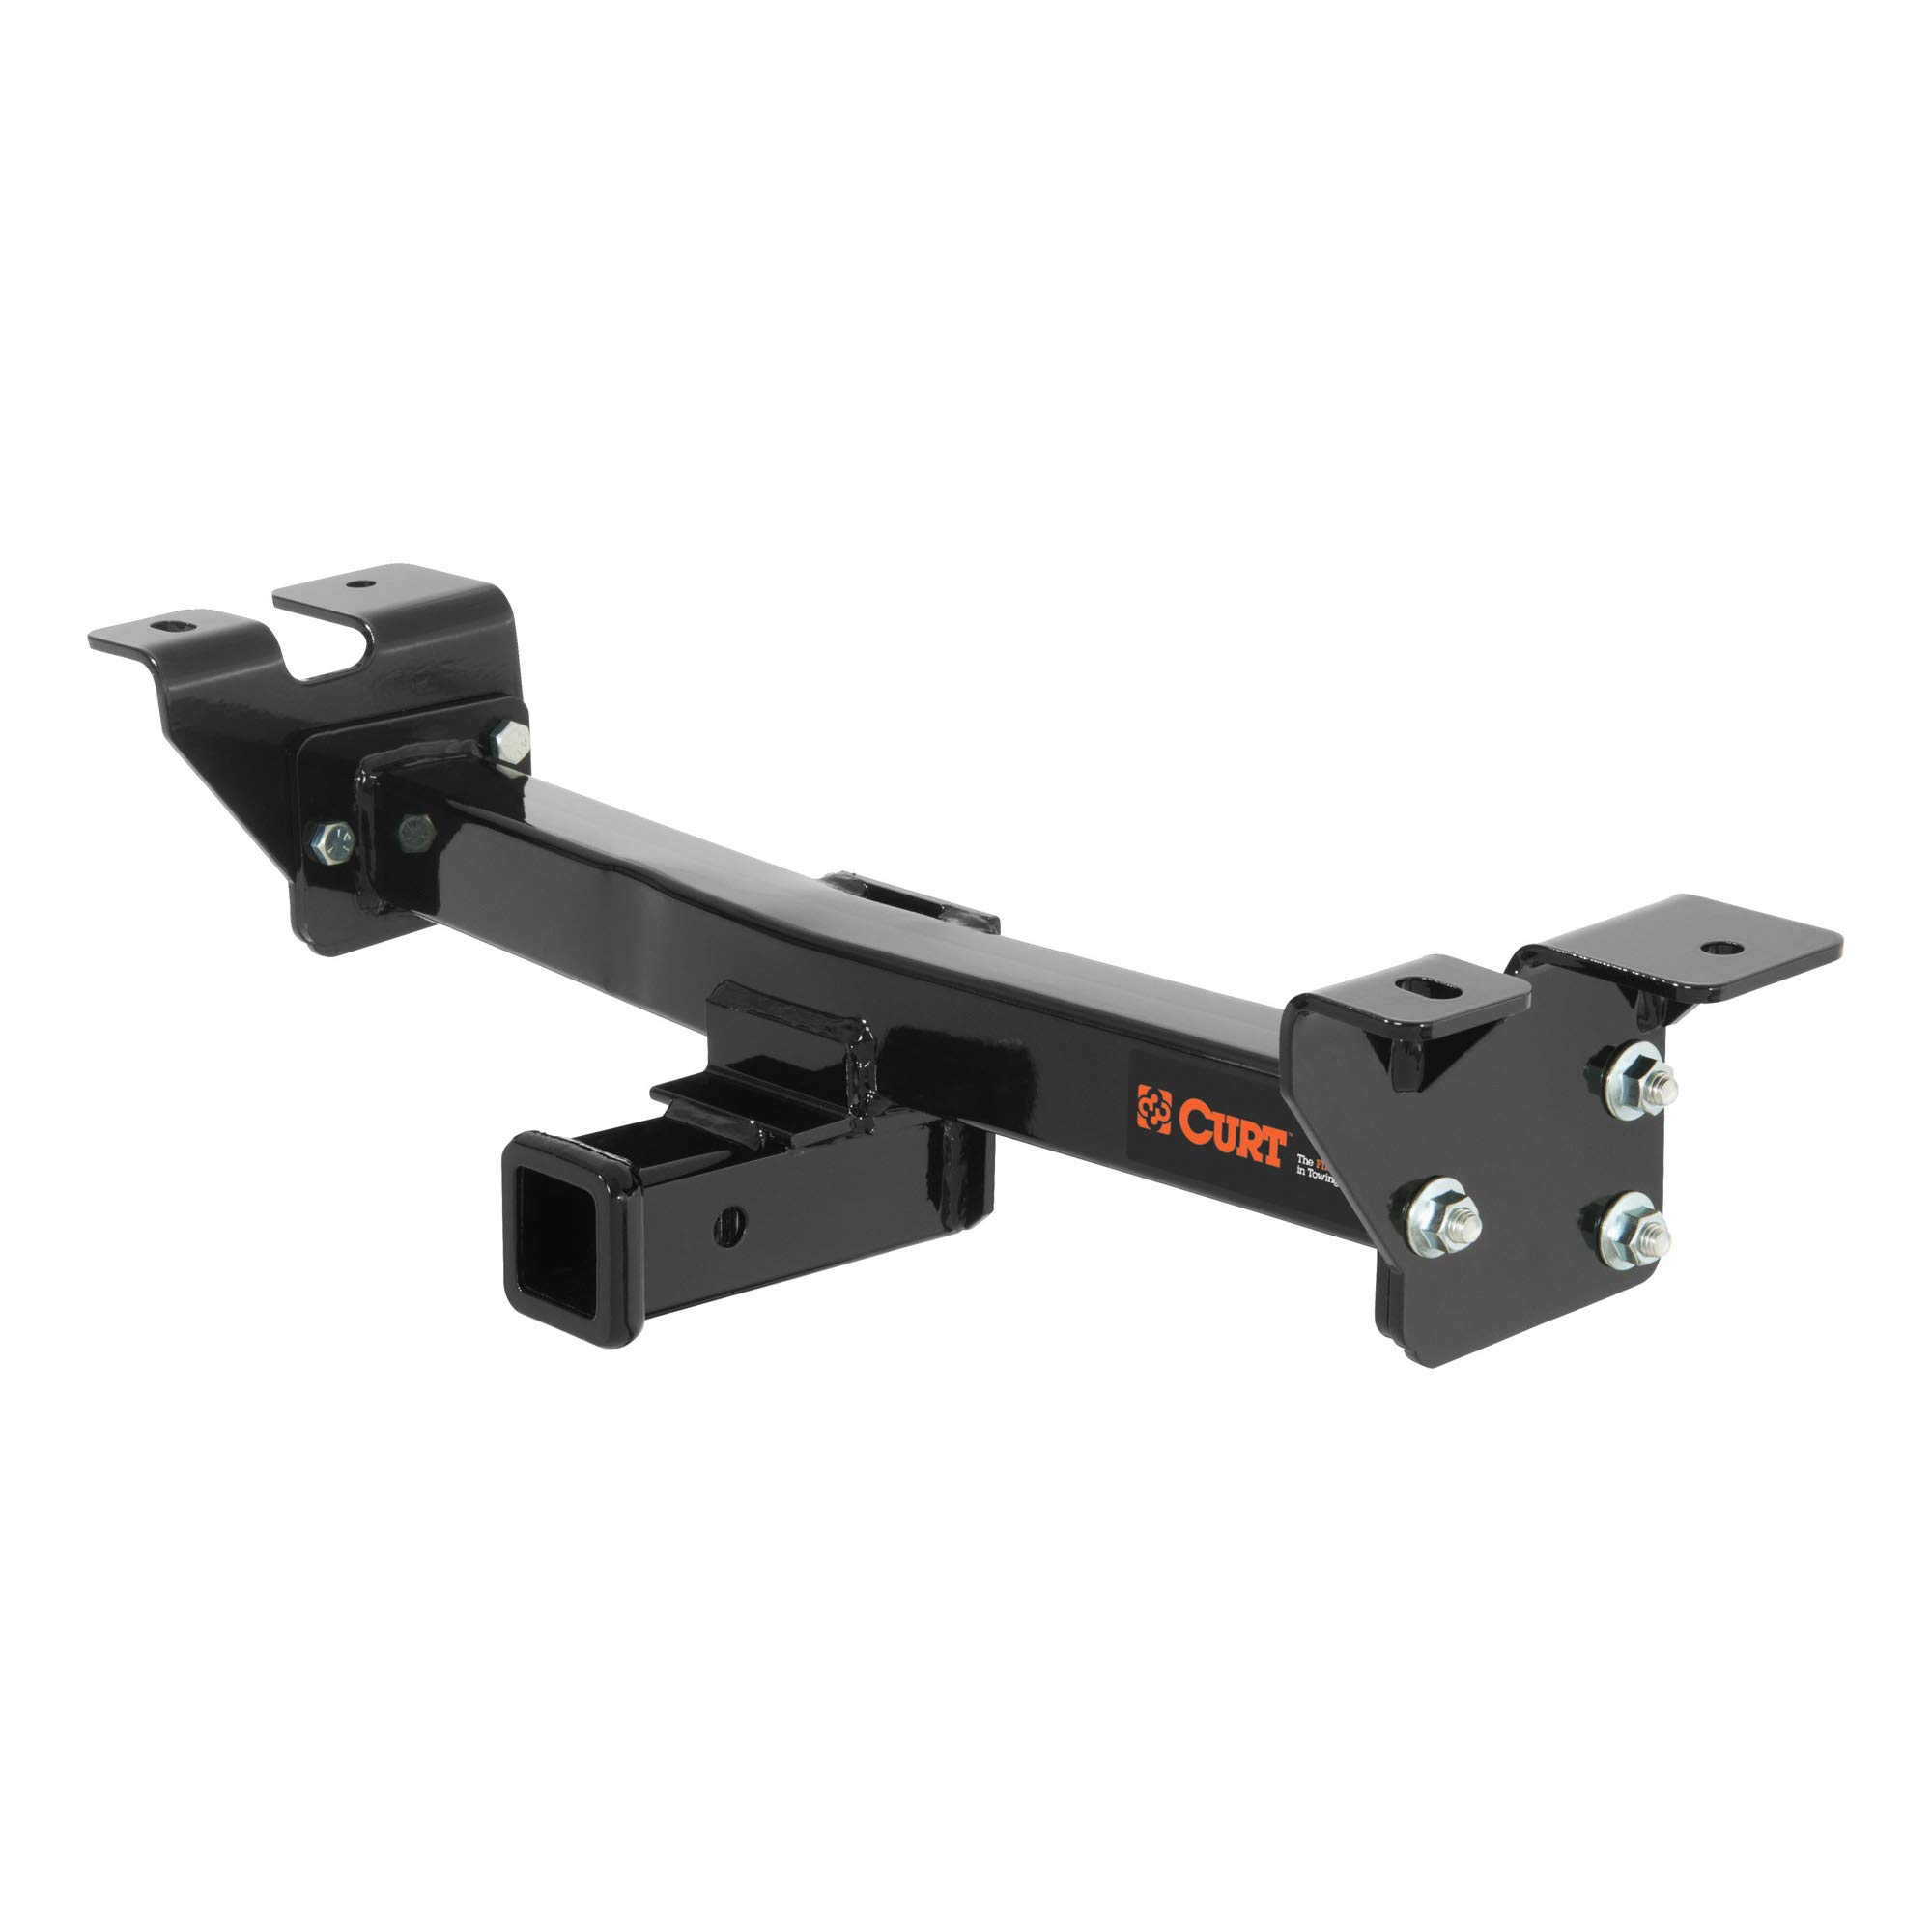 CURT 31302 2-Inch Front Receiver Hitch, Select Cadillac, Chevrolet, GMC Trucks, SUVs